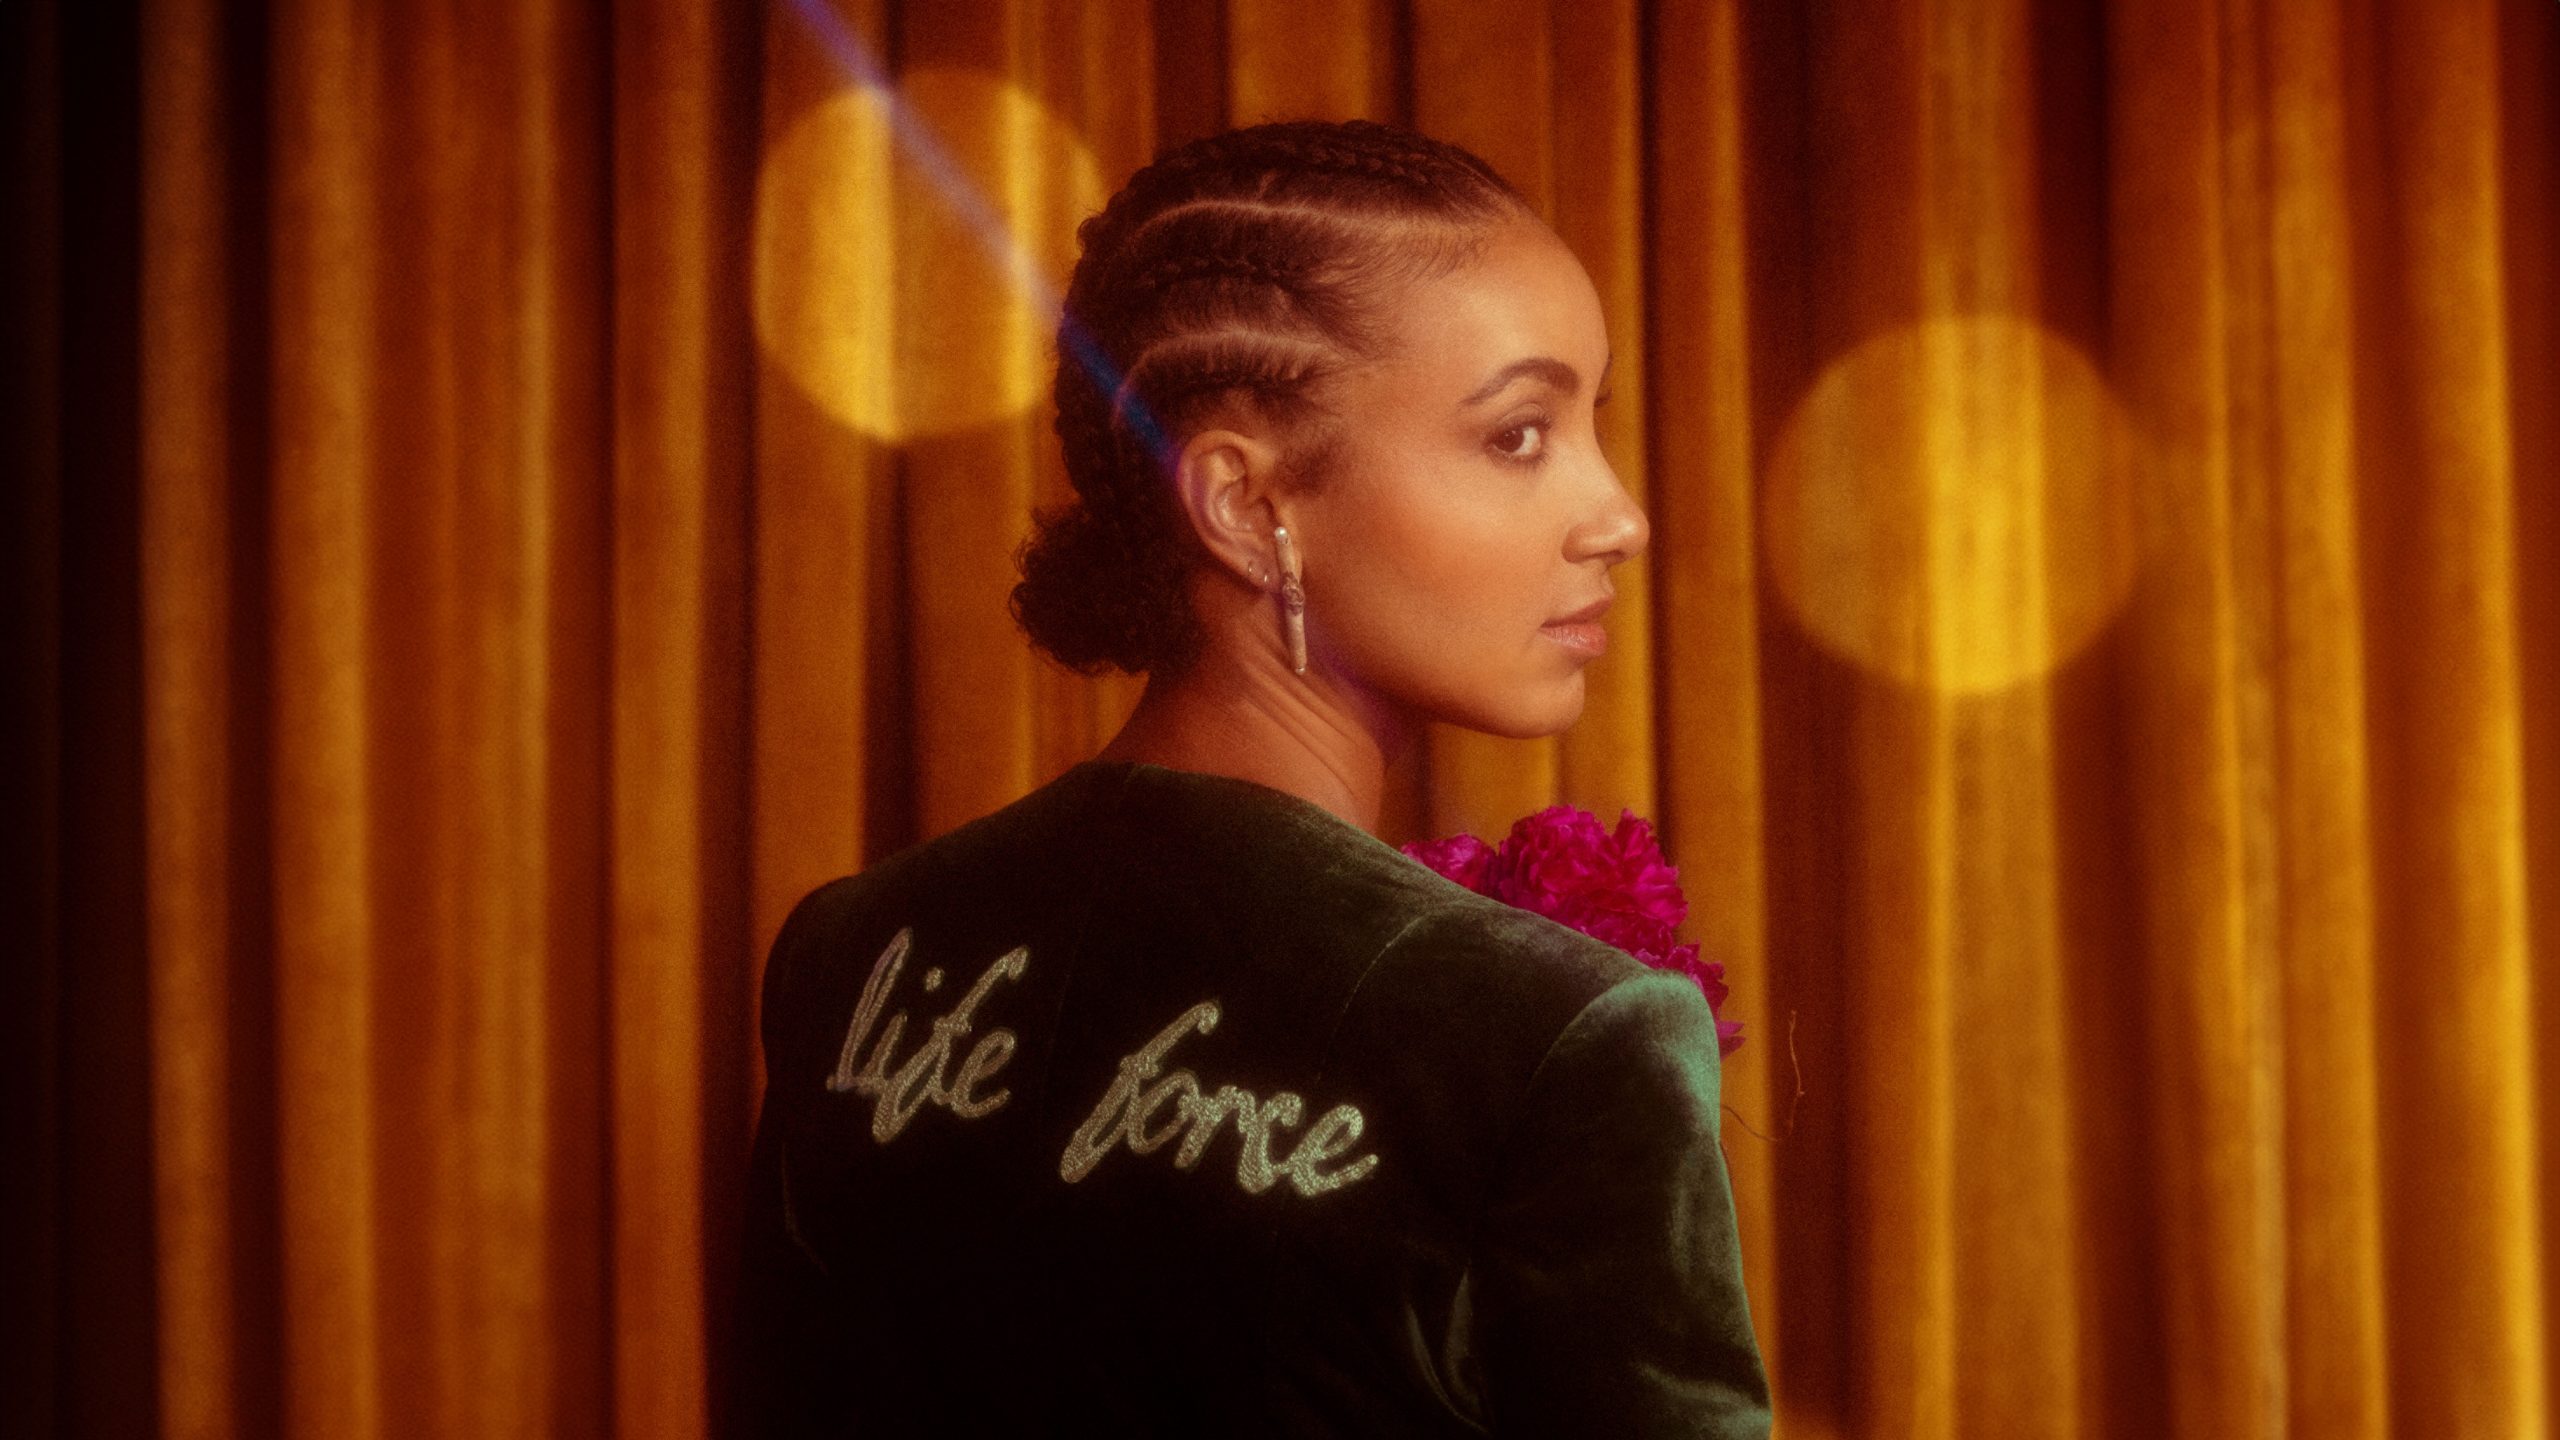 Esperanza Spalding with braided hair and a flower gazes thoughtfully to the side against a backdrop of warm golden drapery, illuminated by a soft, diffused light.